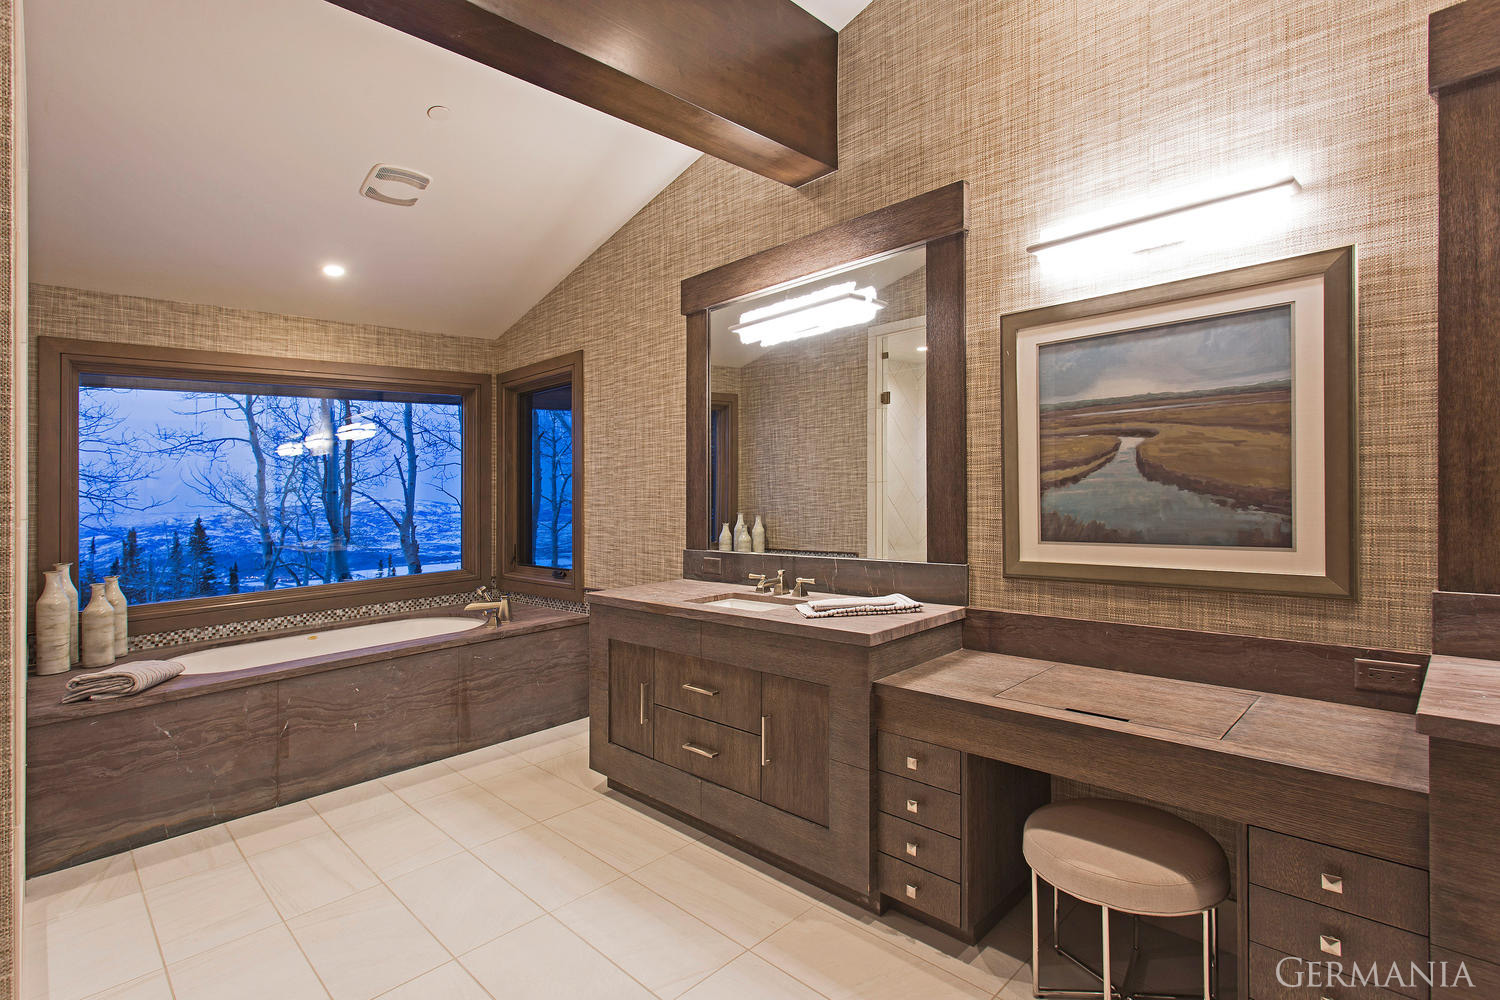 Germania Construction are experts are luxury home master bathroom construction. Every detail from the bathtub to our cabinets are scrutinized at every point of the construction process.